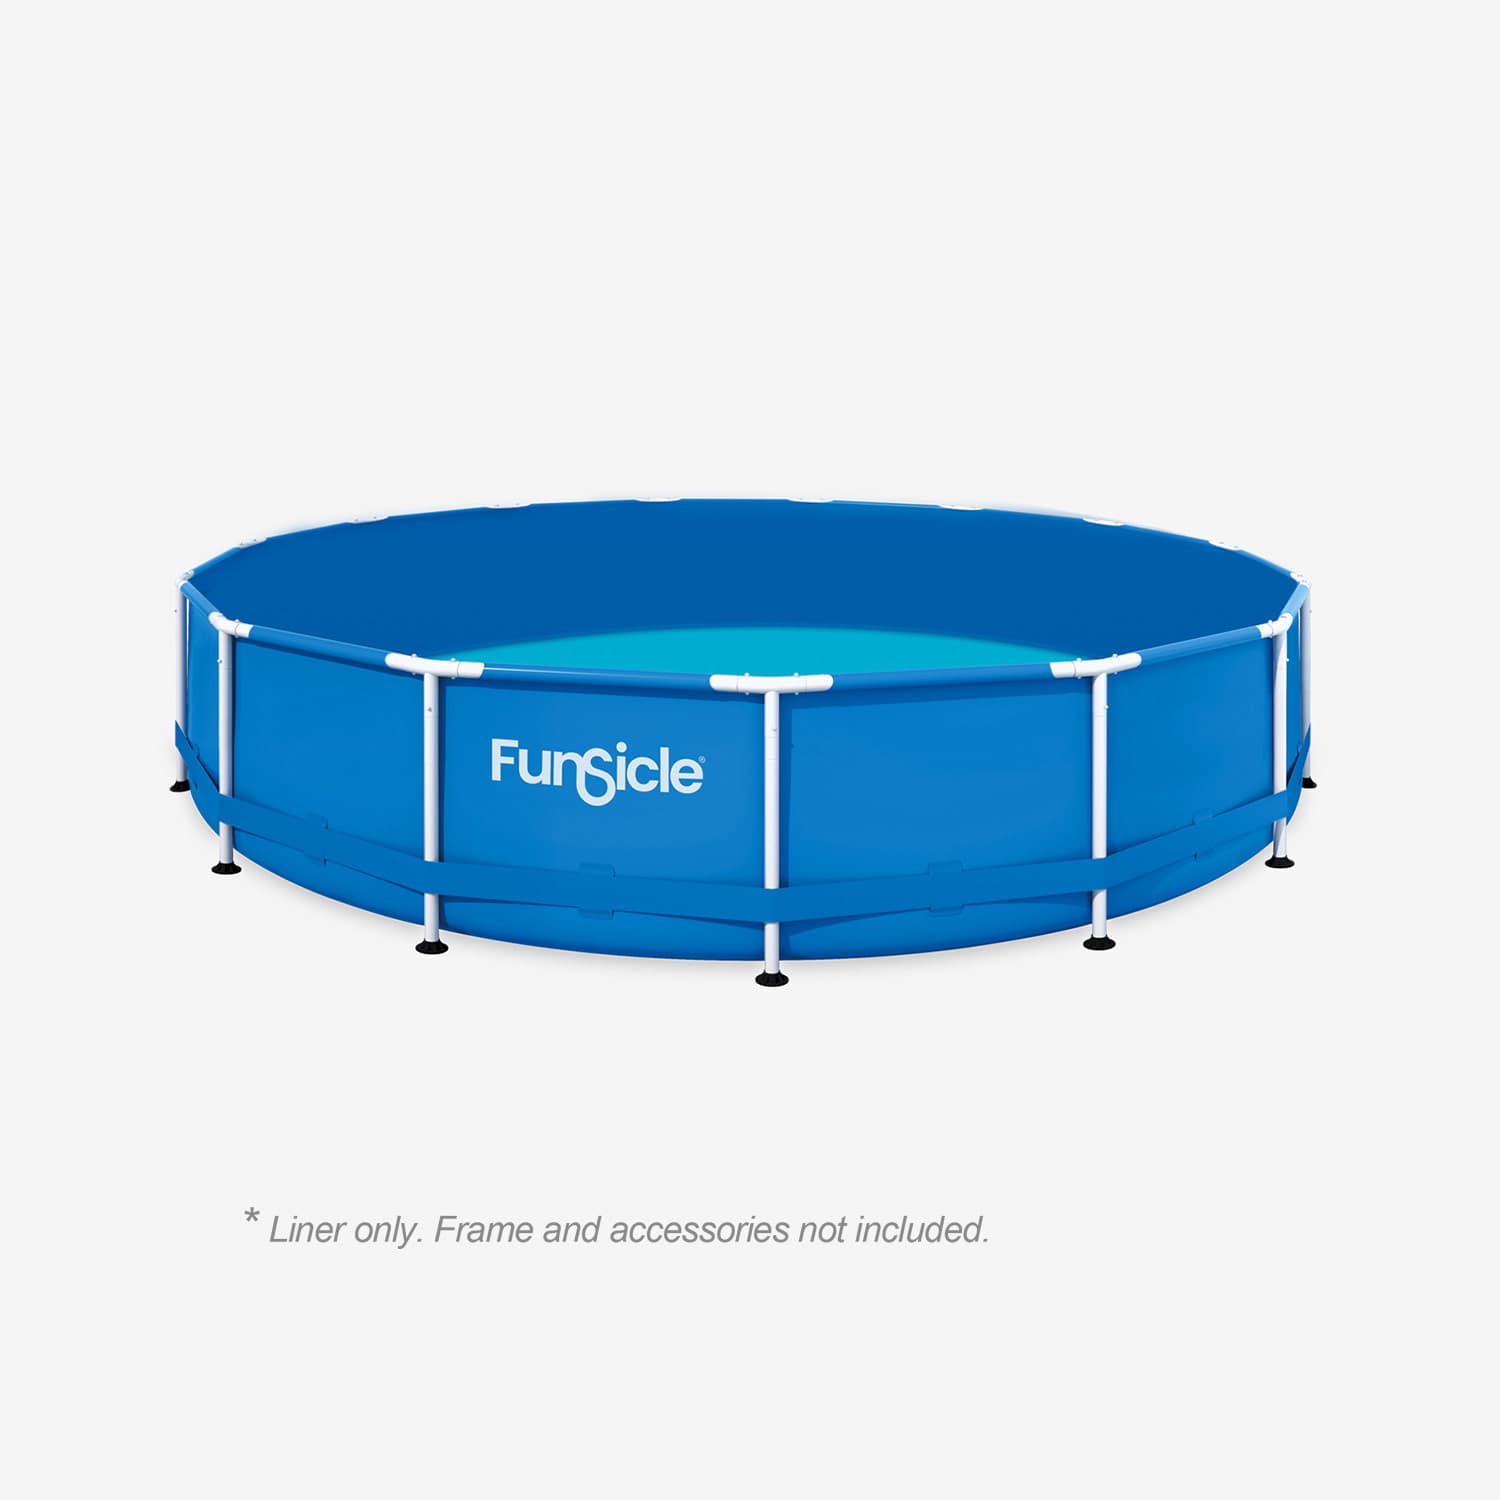 Funsicle 15 ft Activity Pool Liner